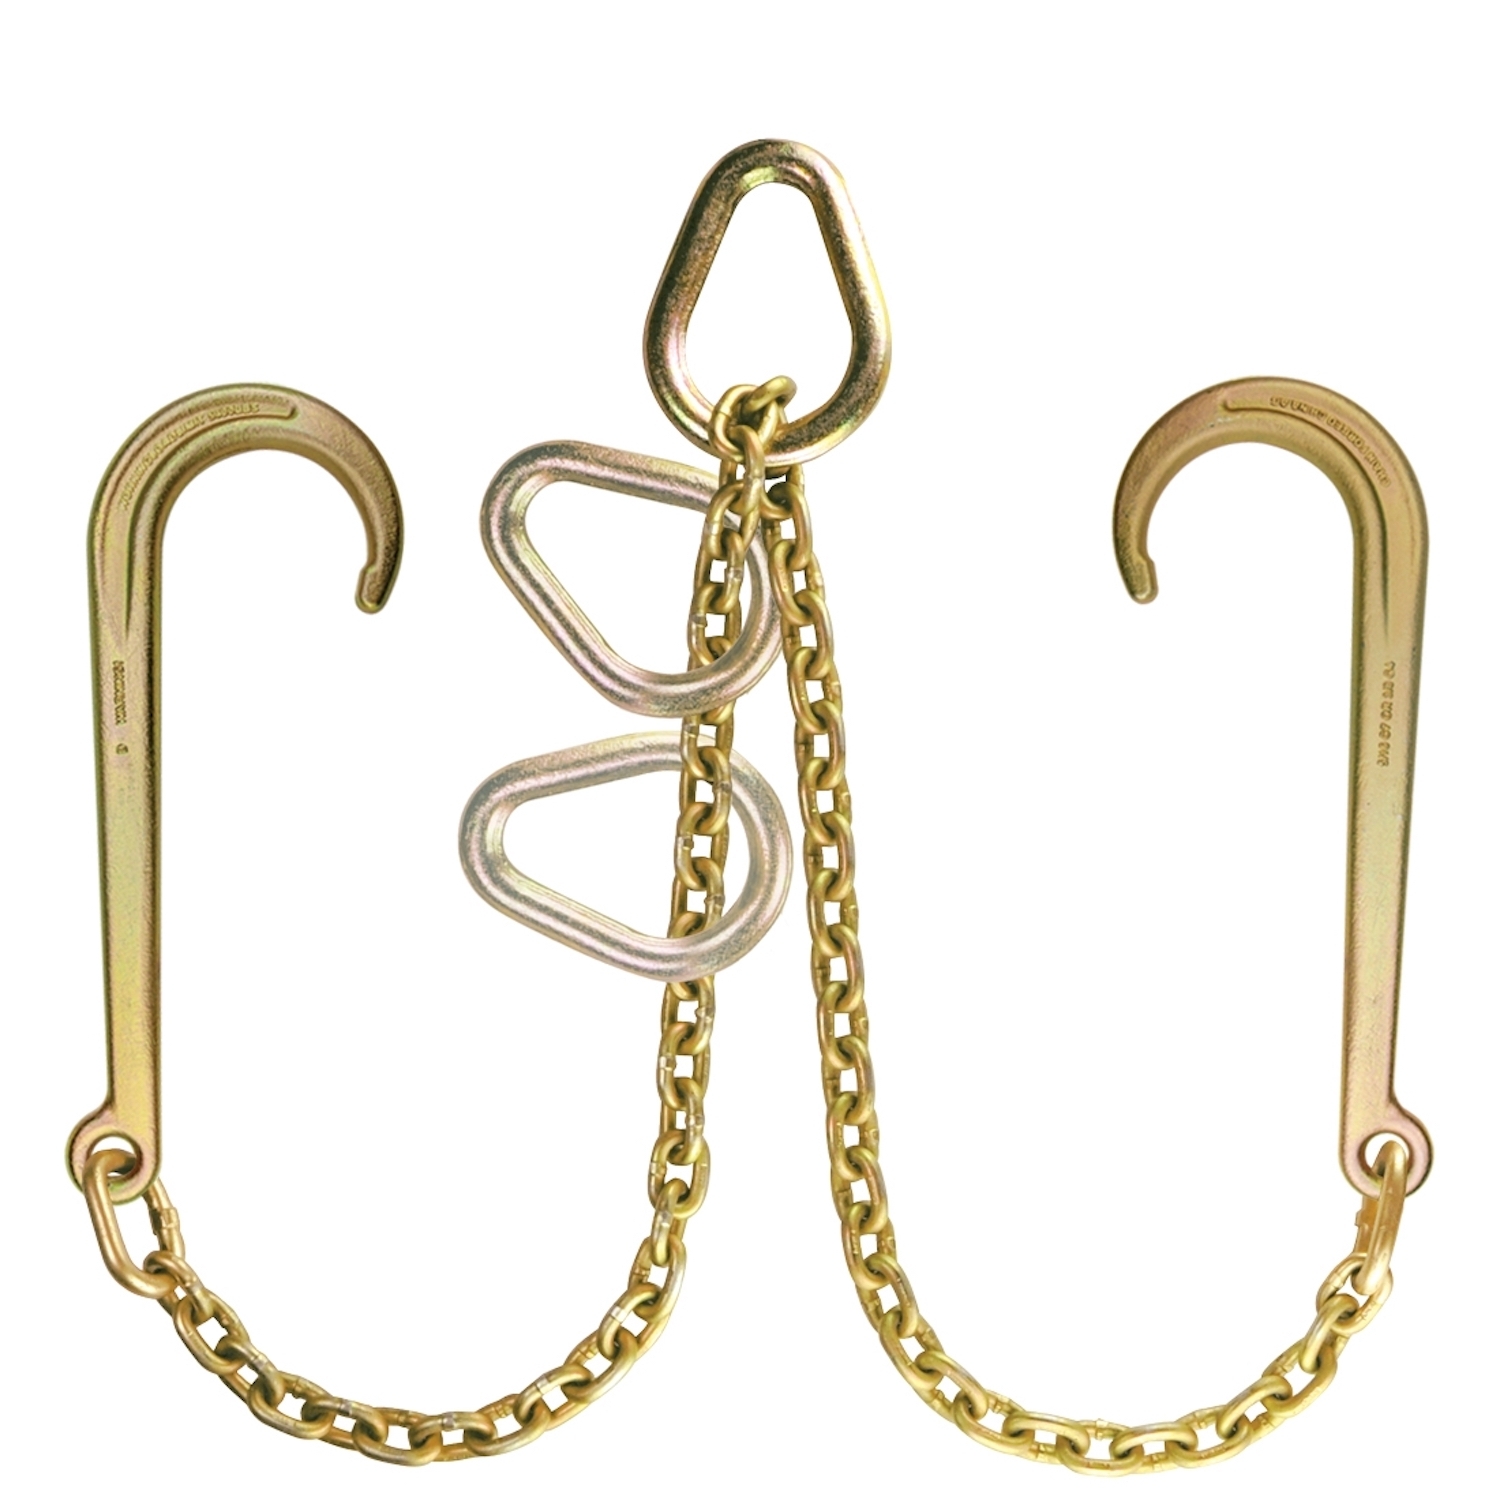 SWL 4700 lbs 40 Johnstown Grade 70 Towing Chain Bridle with 8 J-Hooks 